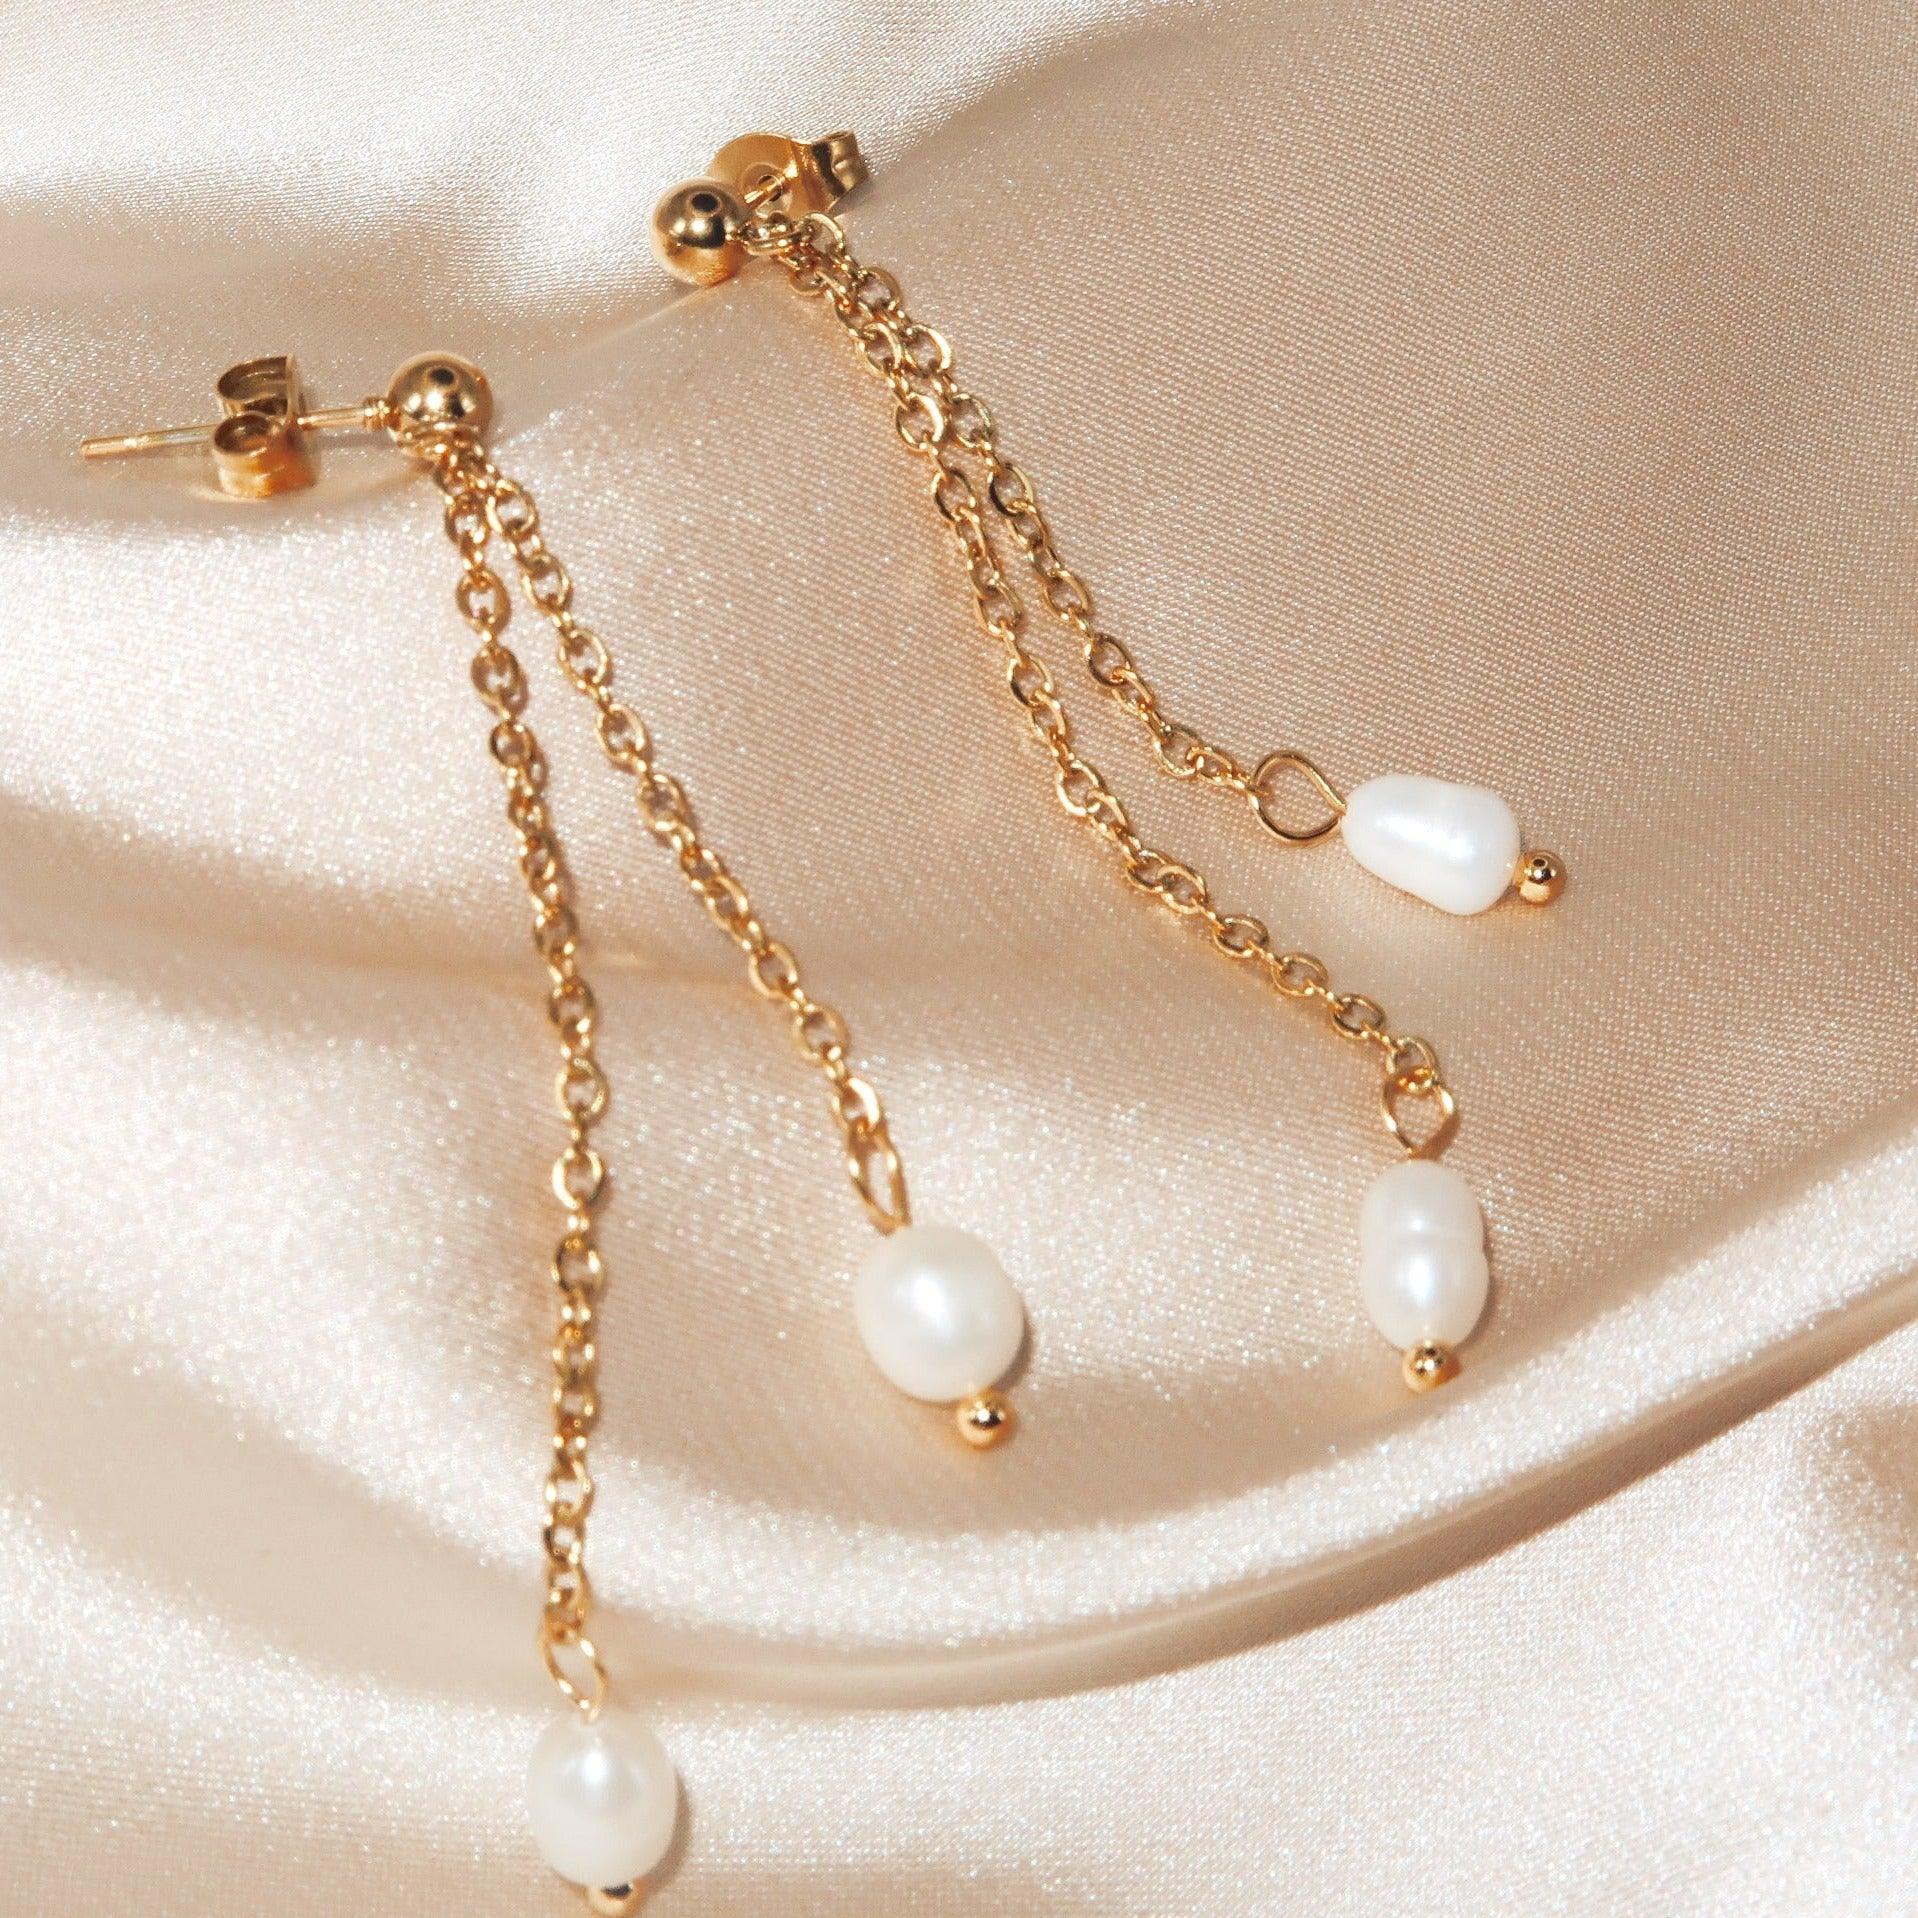 KRISTA - 18K PVD Gold Plated Dainty Freshwater Pearl Earrings - Mixed Metals